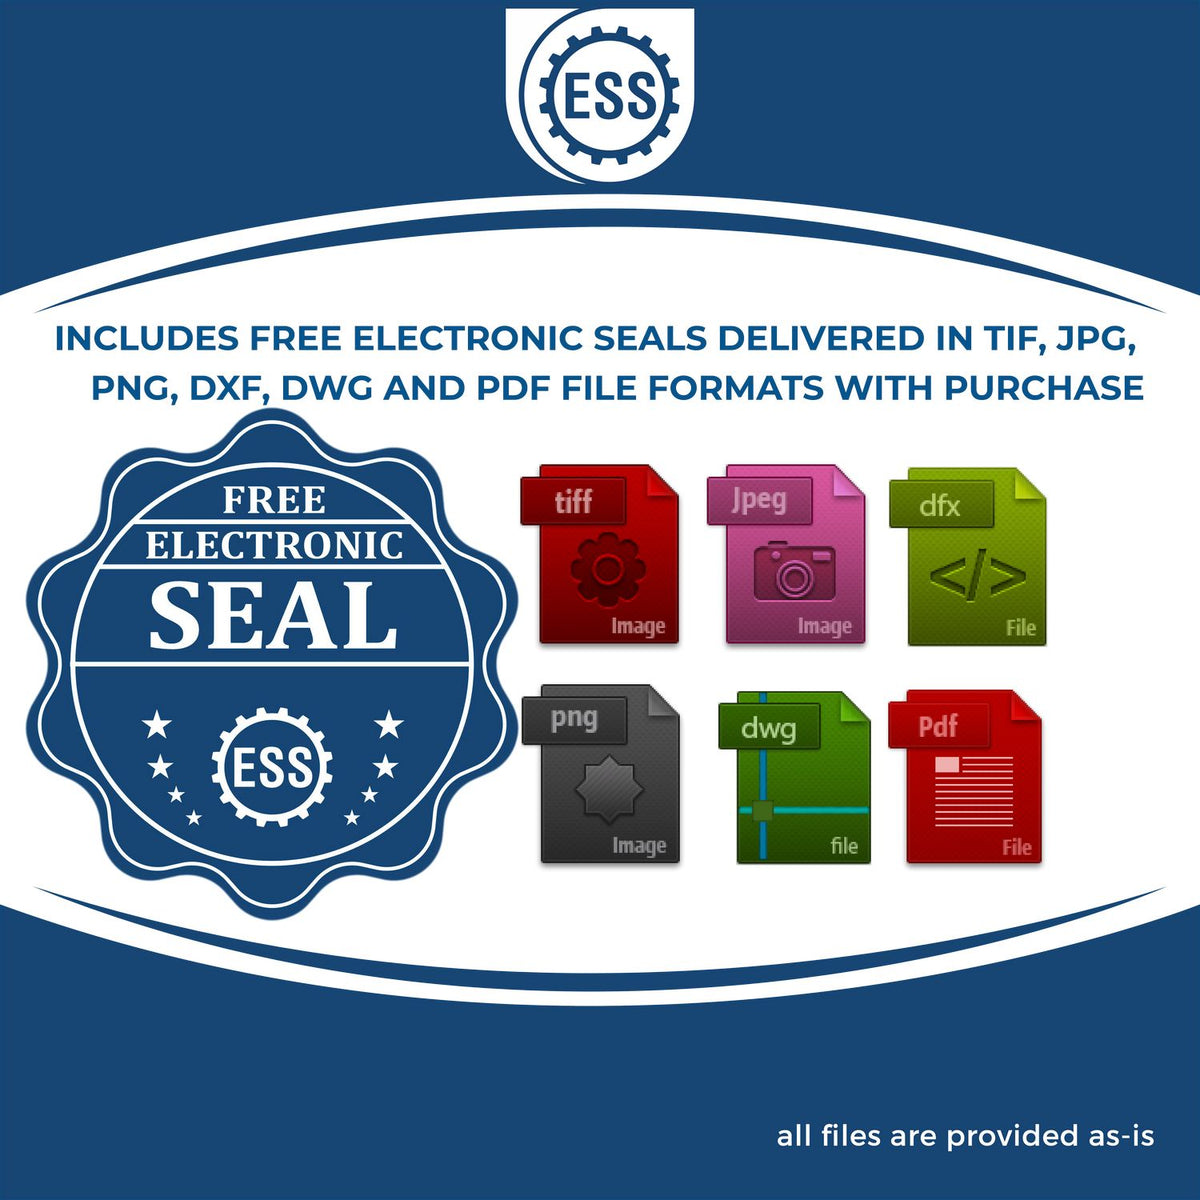 An infographic for the free electronic seal for the Gift Wyoming Landscape Architect Seal illustrating the different file type icons such as DXF, DWG, TIF, JPG and PNG.